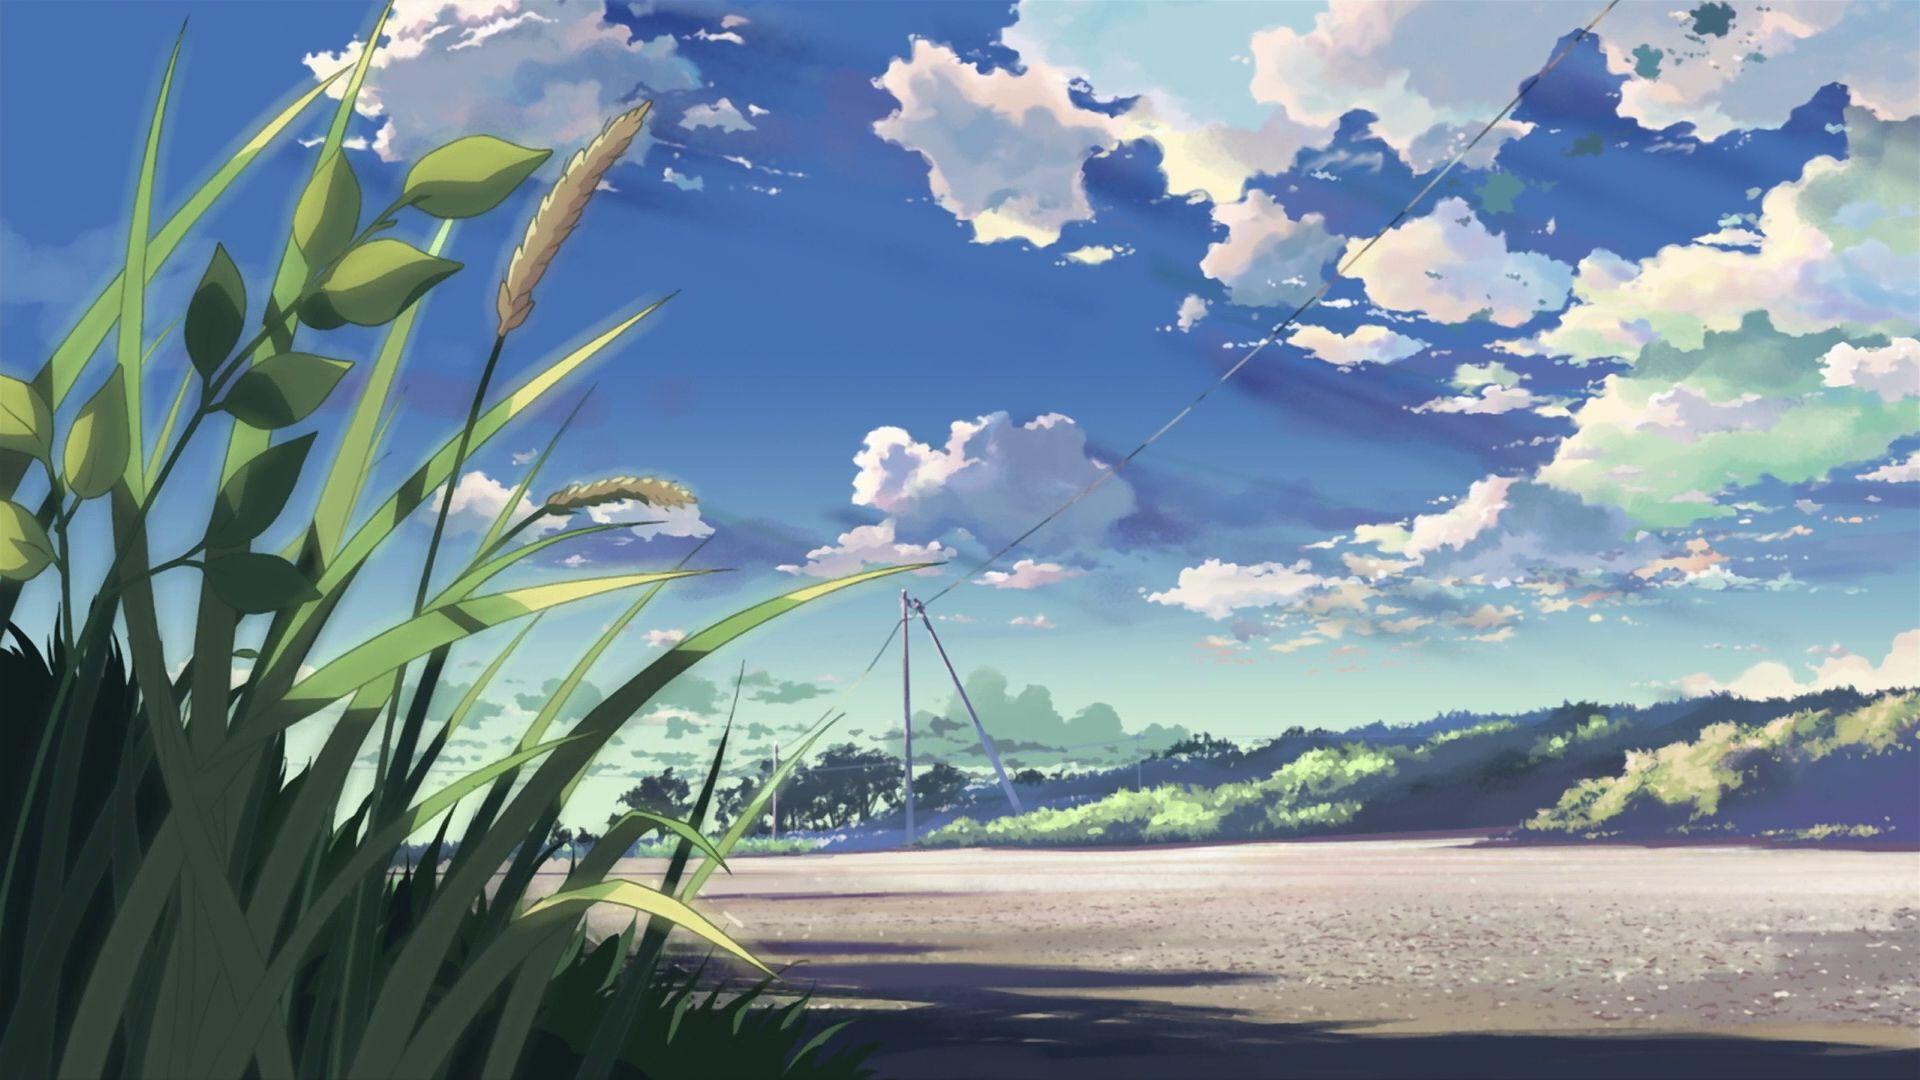 Anime Scenery Wallpapers - Top Free Anime Scenery Backgrounds ...